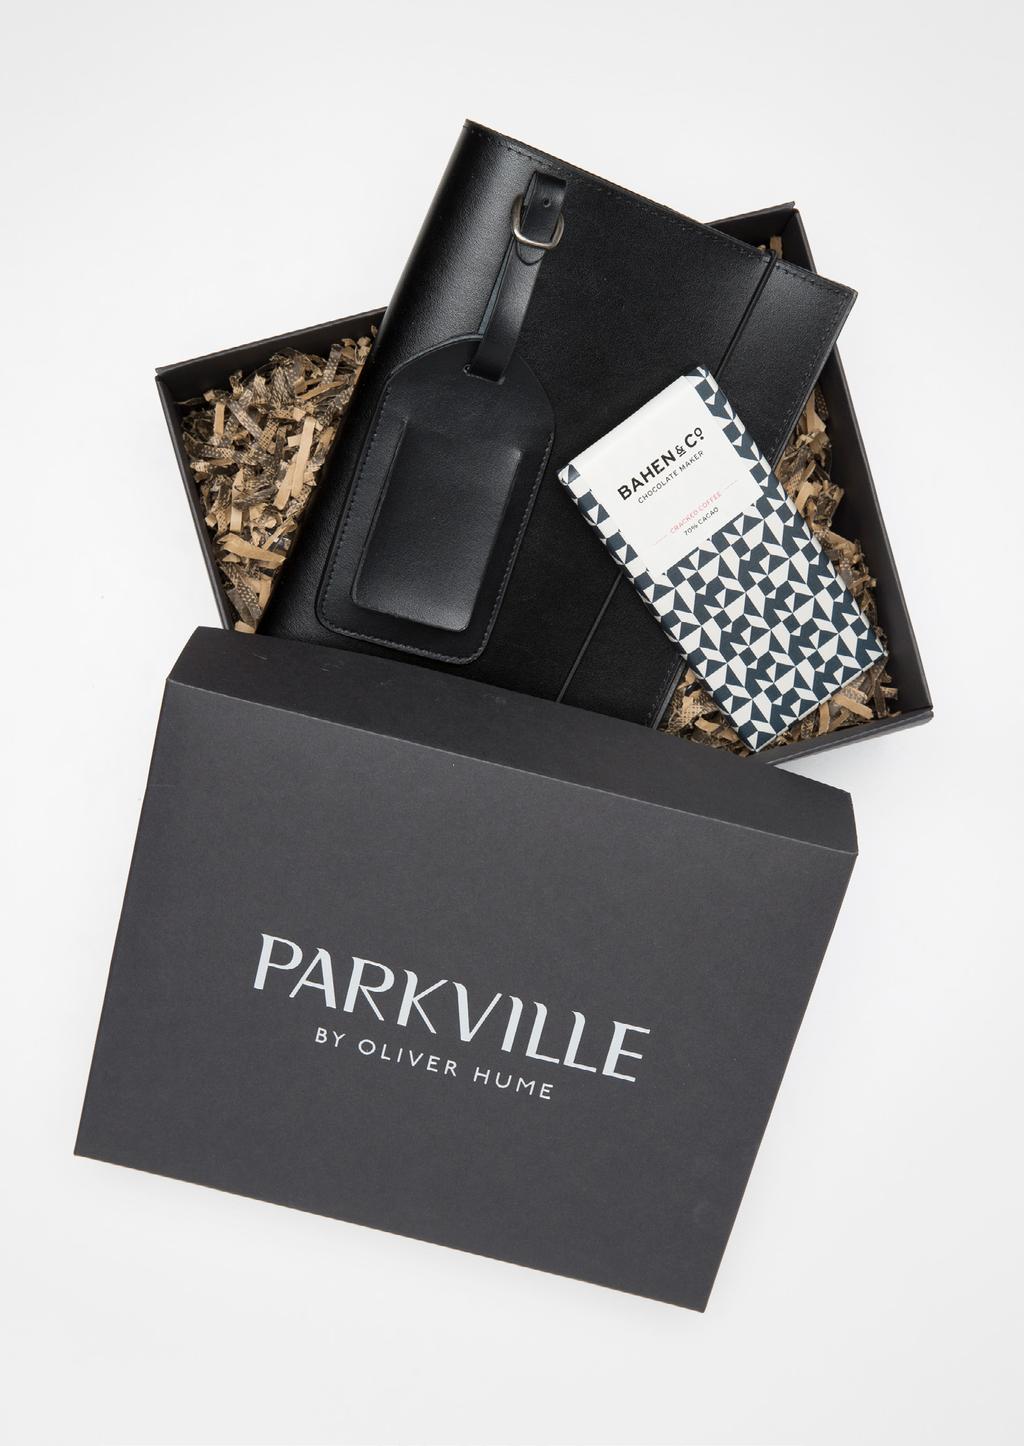 Personalised Corporate Gifting CUSTOM BRANDING FOR YOUR BUSINESS At Bindle we help you design and customise gifts incorporating your recipients values and understanding your marketing strategy.